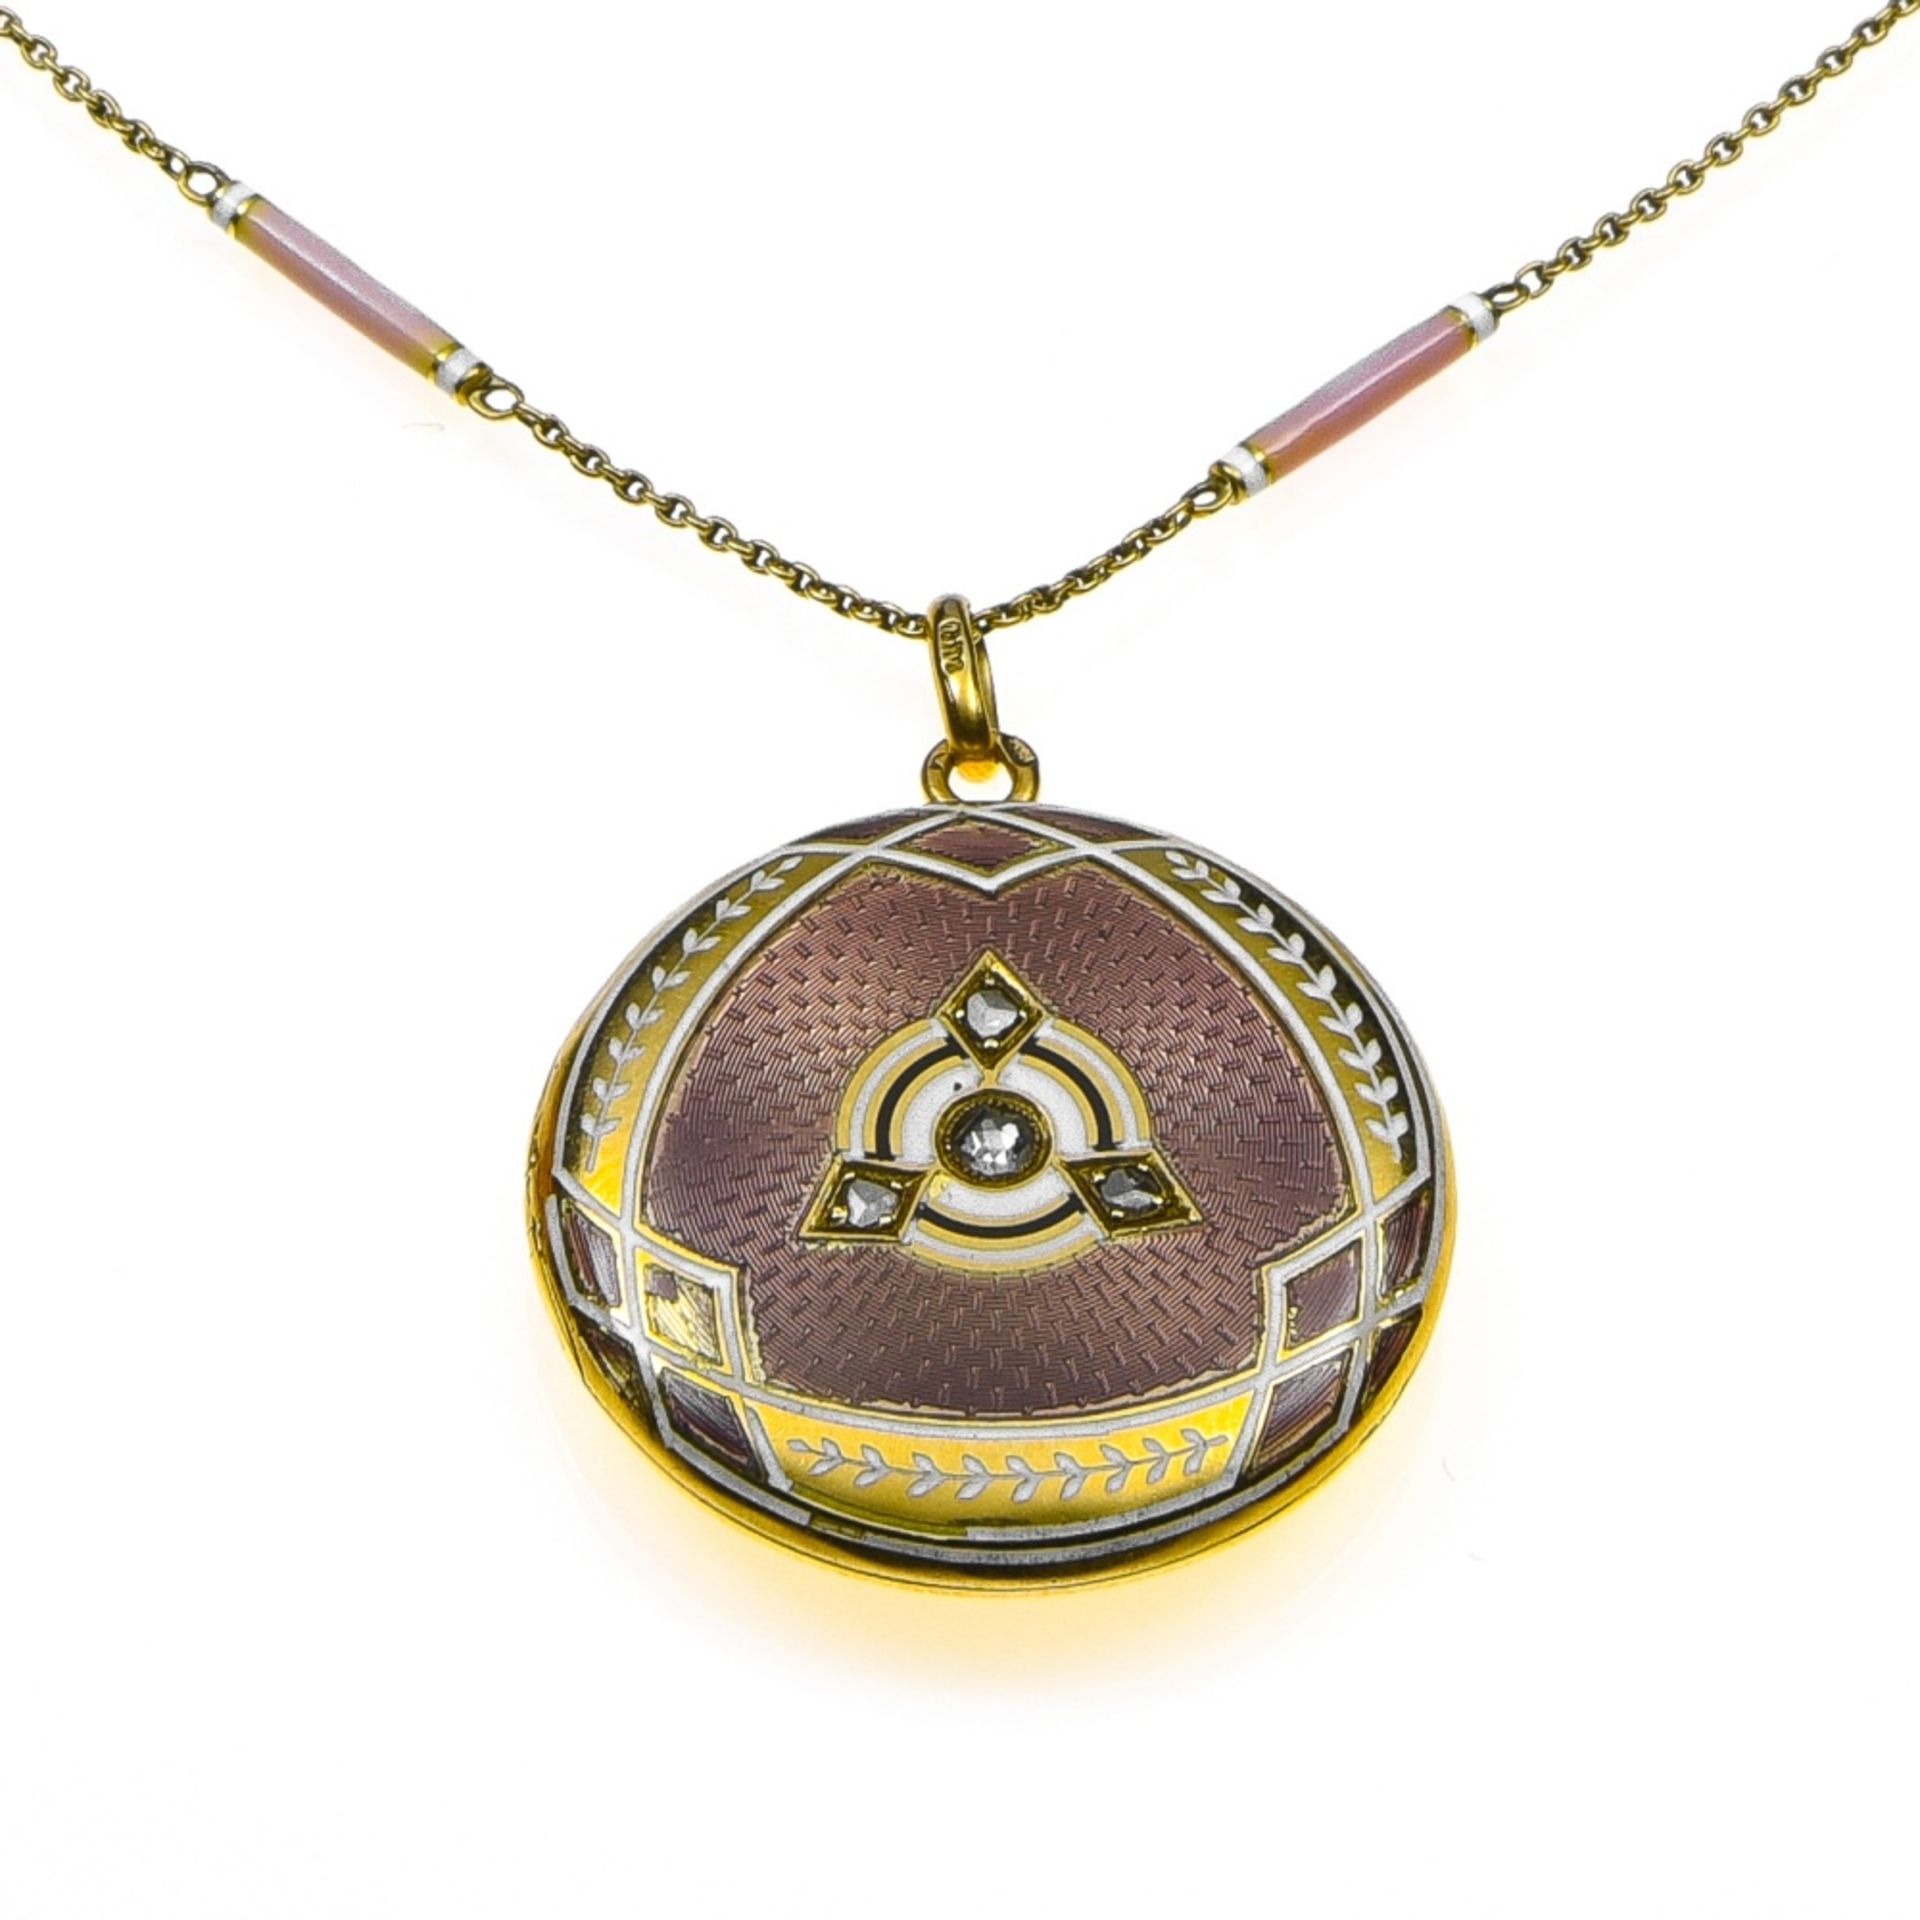 Neoclassical necklace 18 kt yellow gold, composed of a long chain and a round locket medallion - Image 2 of 4